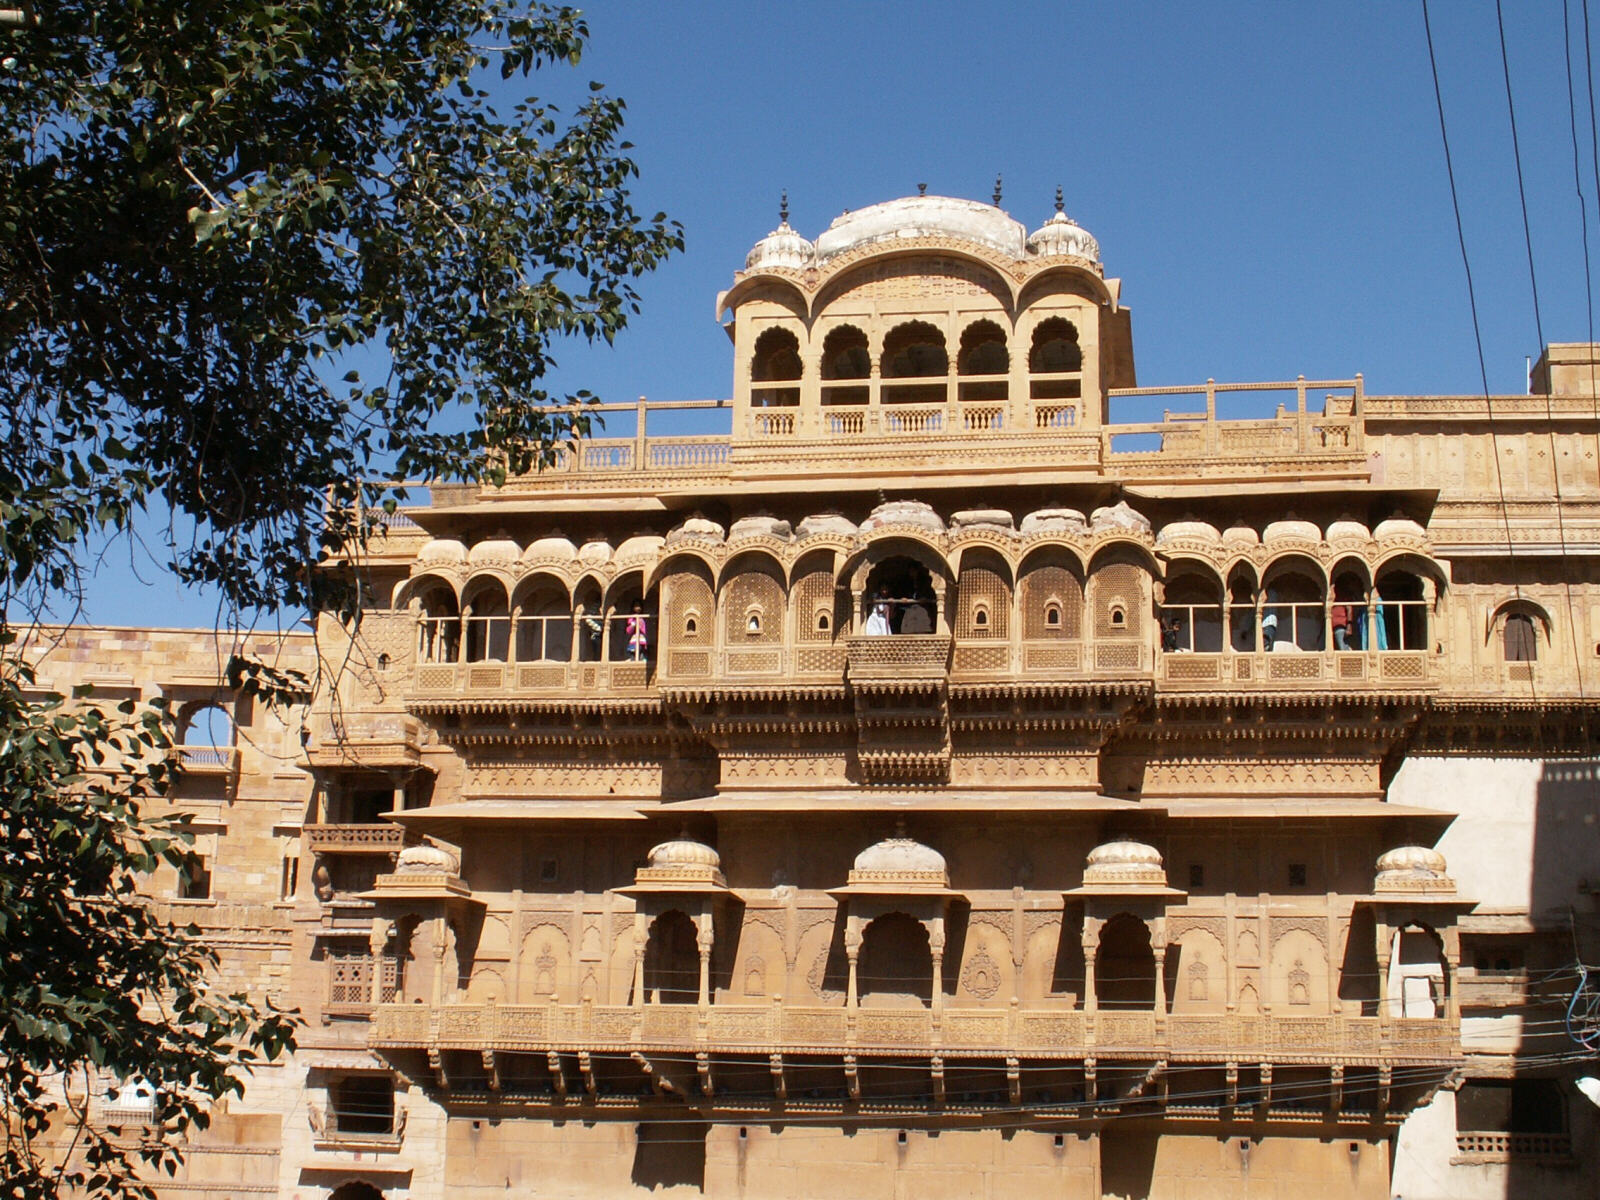 The palace in the fort in Jaisalmer, Rajasthan